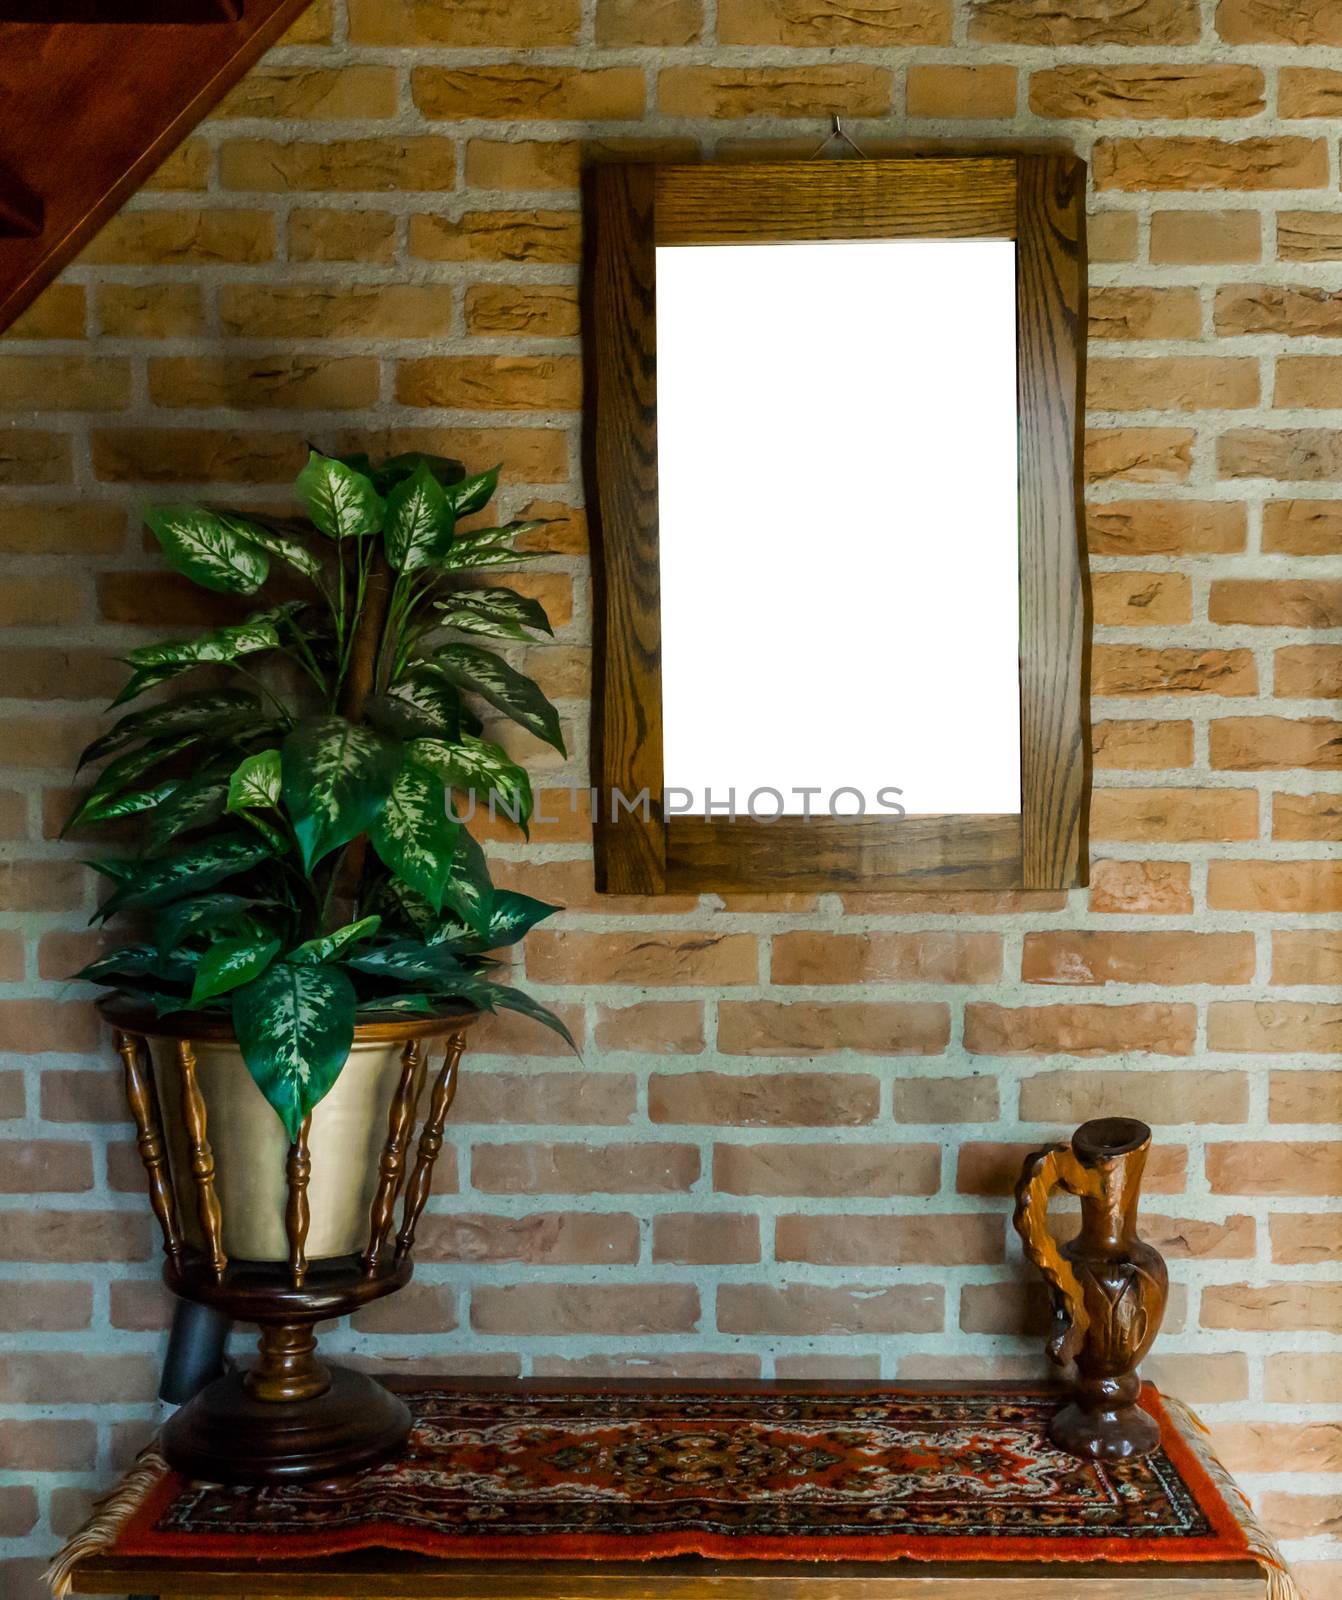 empty blank cut out wooden painting or mirror frame hanging on a brick wall above a table cabinet with a carpet rug decorated with a house plant and vase background texture